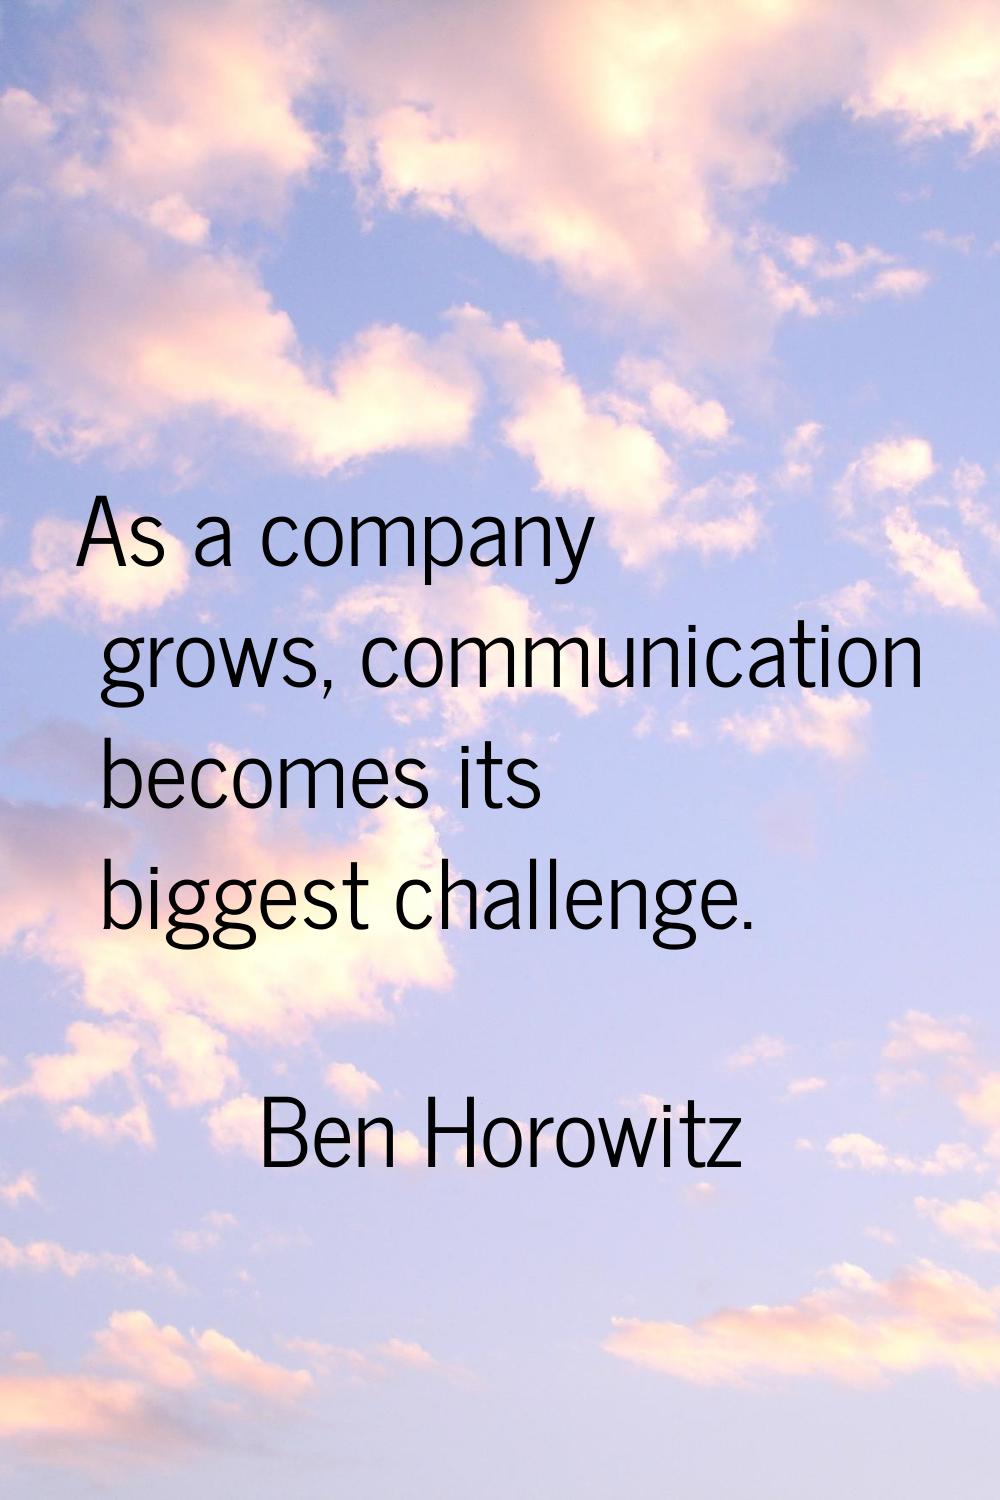 As a company grows, communication becomes its biggest challenge.